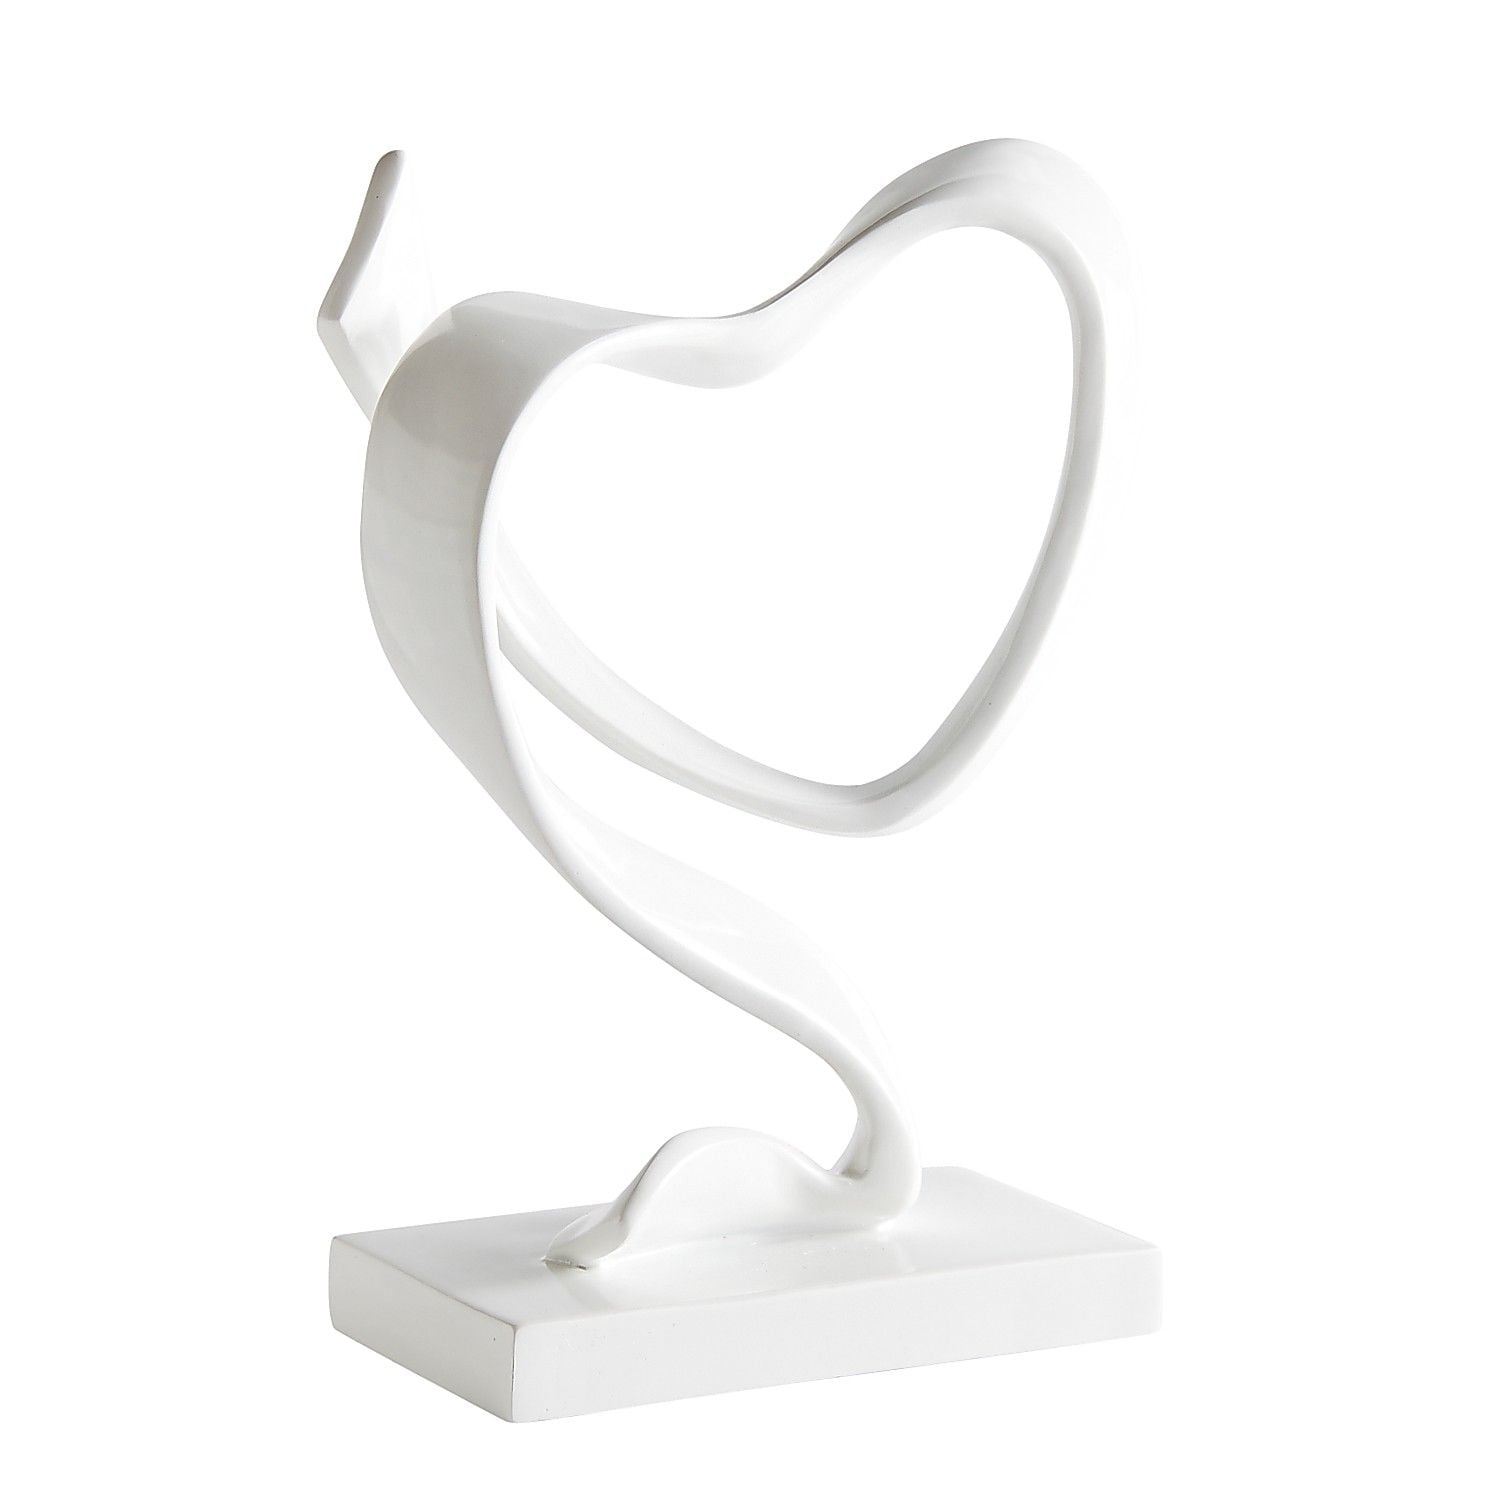 White Modern Swirl Heart, Wait, Did You Know Pier 1 Imports Had This Much  Cute Valentine's Day Decor?